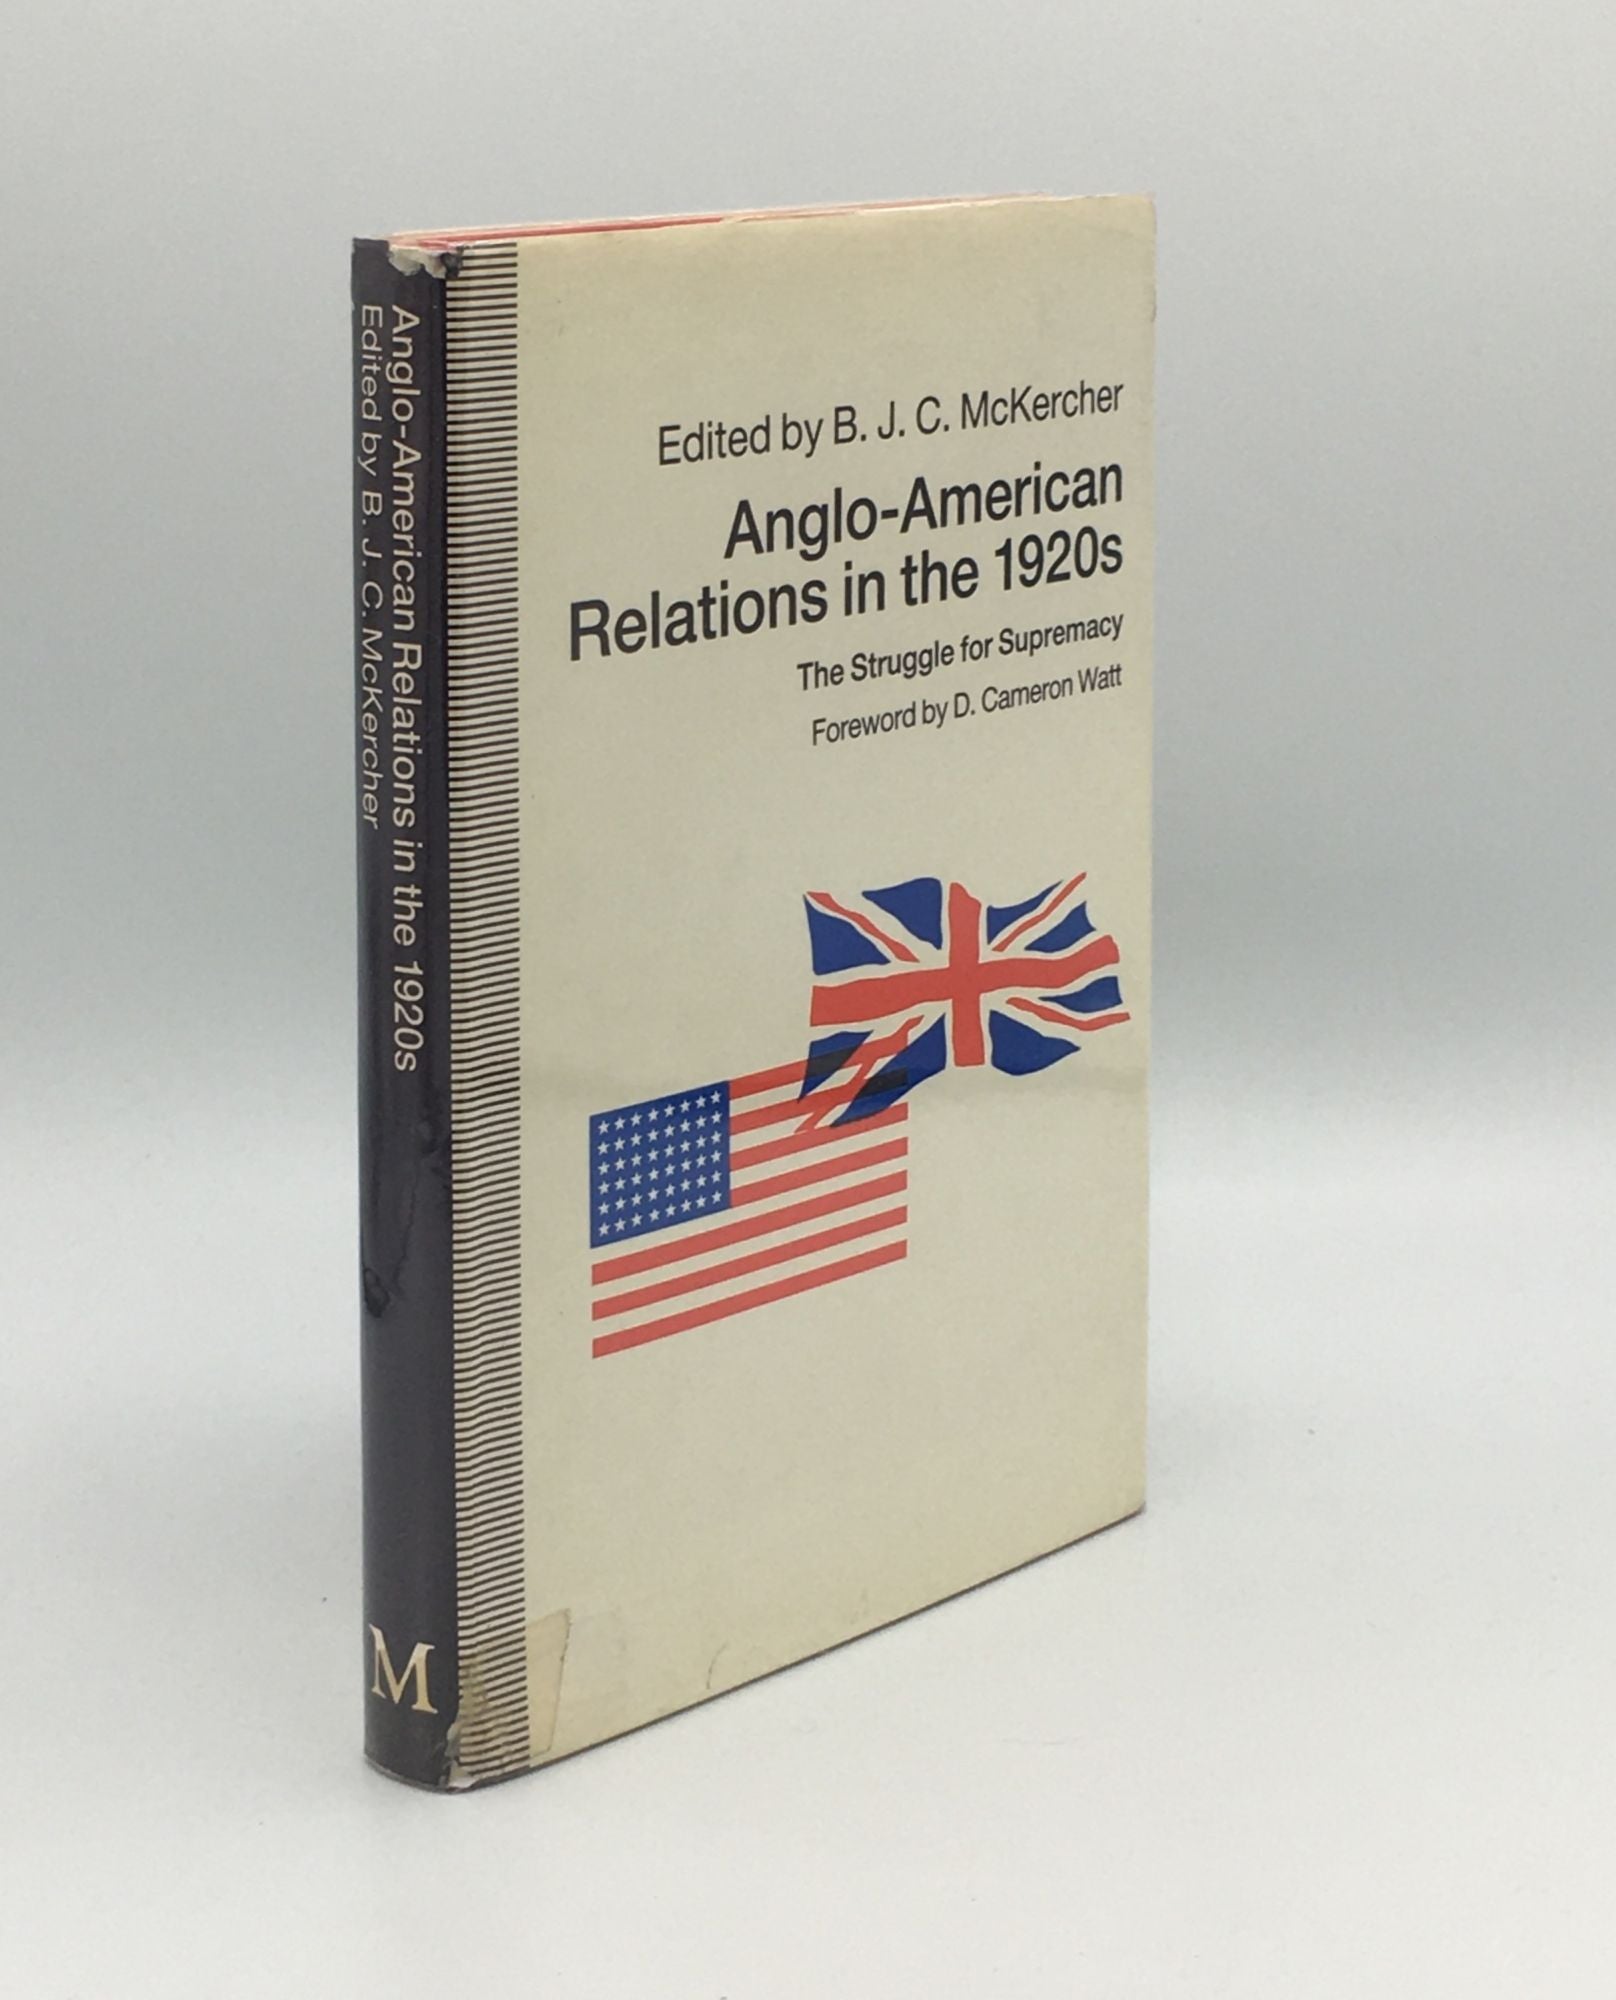 McKERCHER B.J.C. - Anglo-American Relations in the 1920s the Struggle for Supremacy